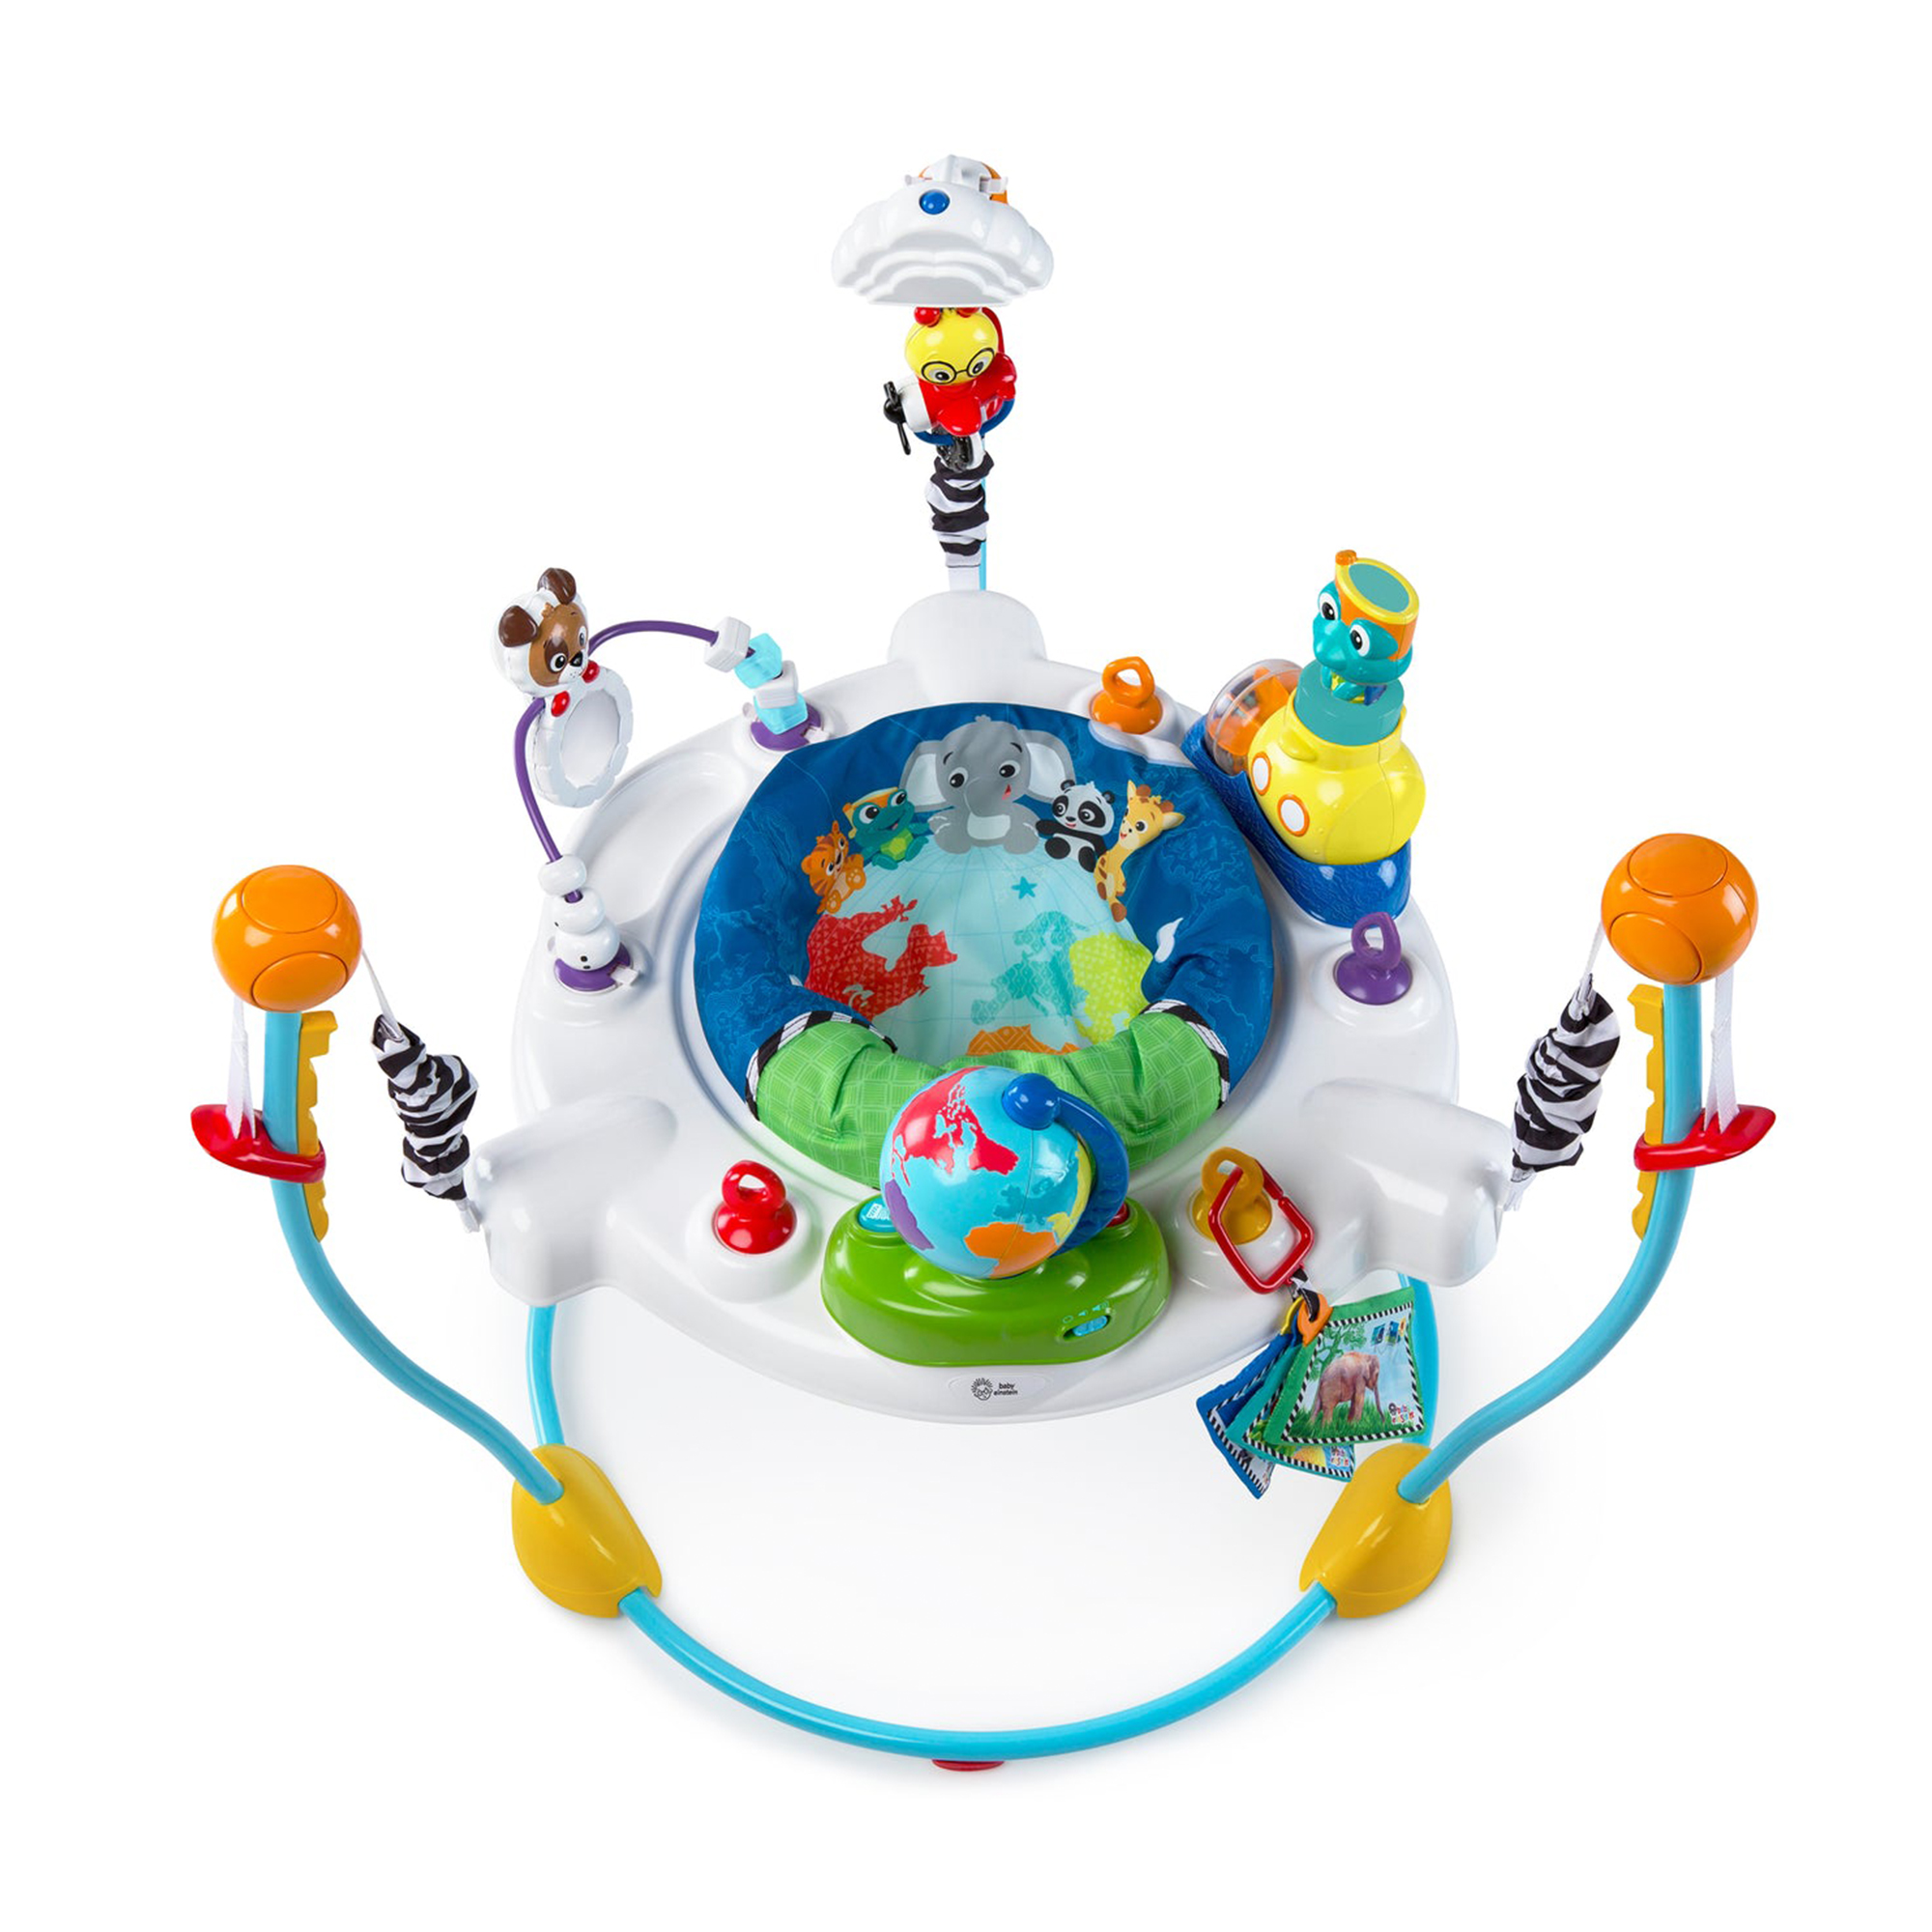 Baby Einstein Journey of Discovery Jumper Activity Center with Lights and Sounds - image 5 of 12